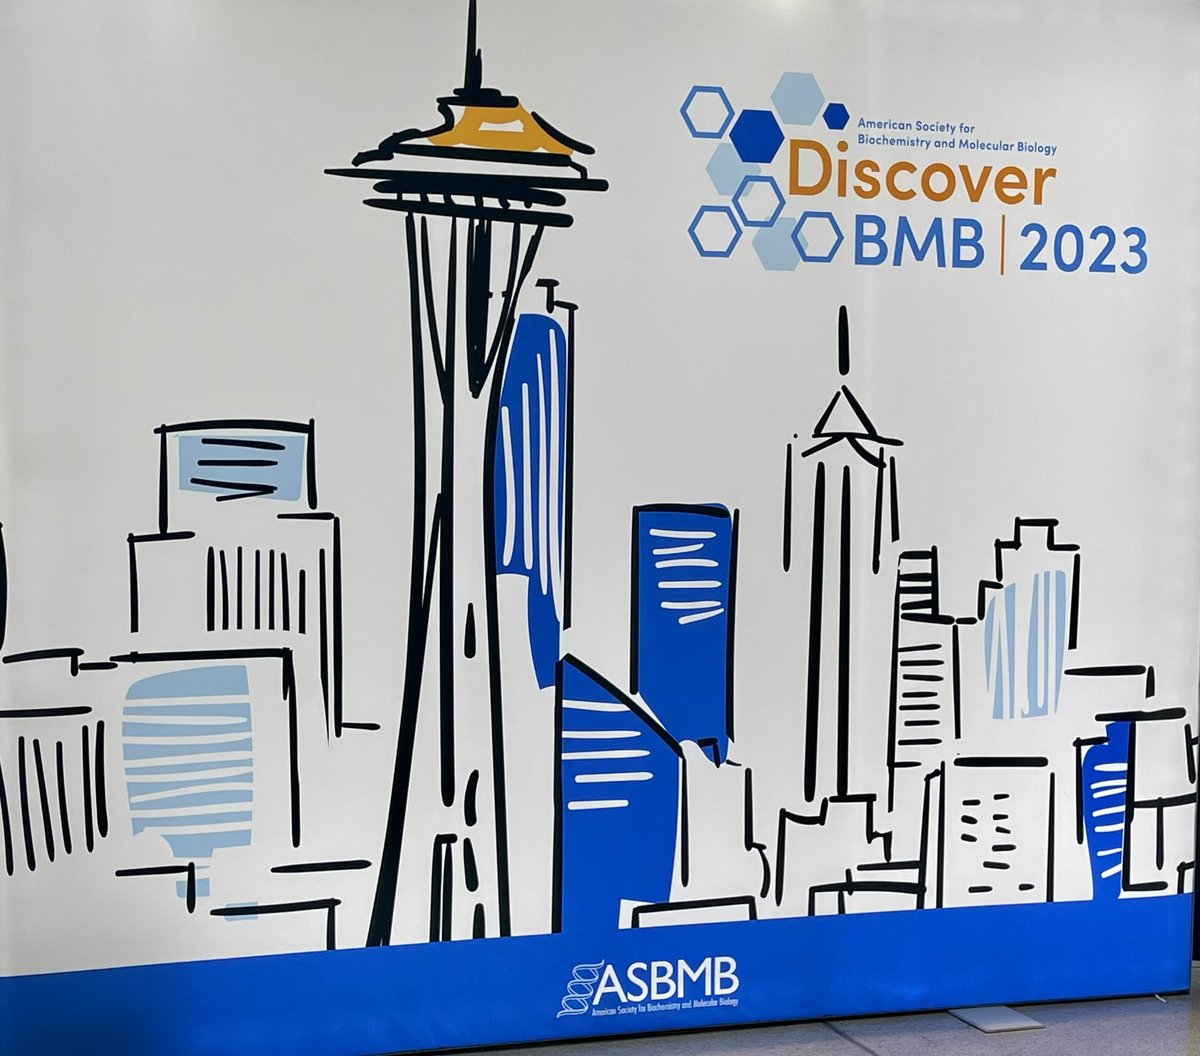 Excited to present tomorrow at #DiscoverBMB2023 #DiscoverBMB ! Looking forward to connecting and reconnecting with colleagues in Seattle.